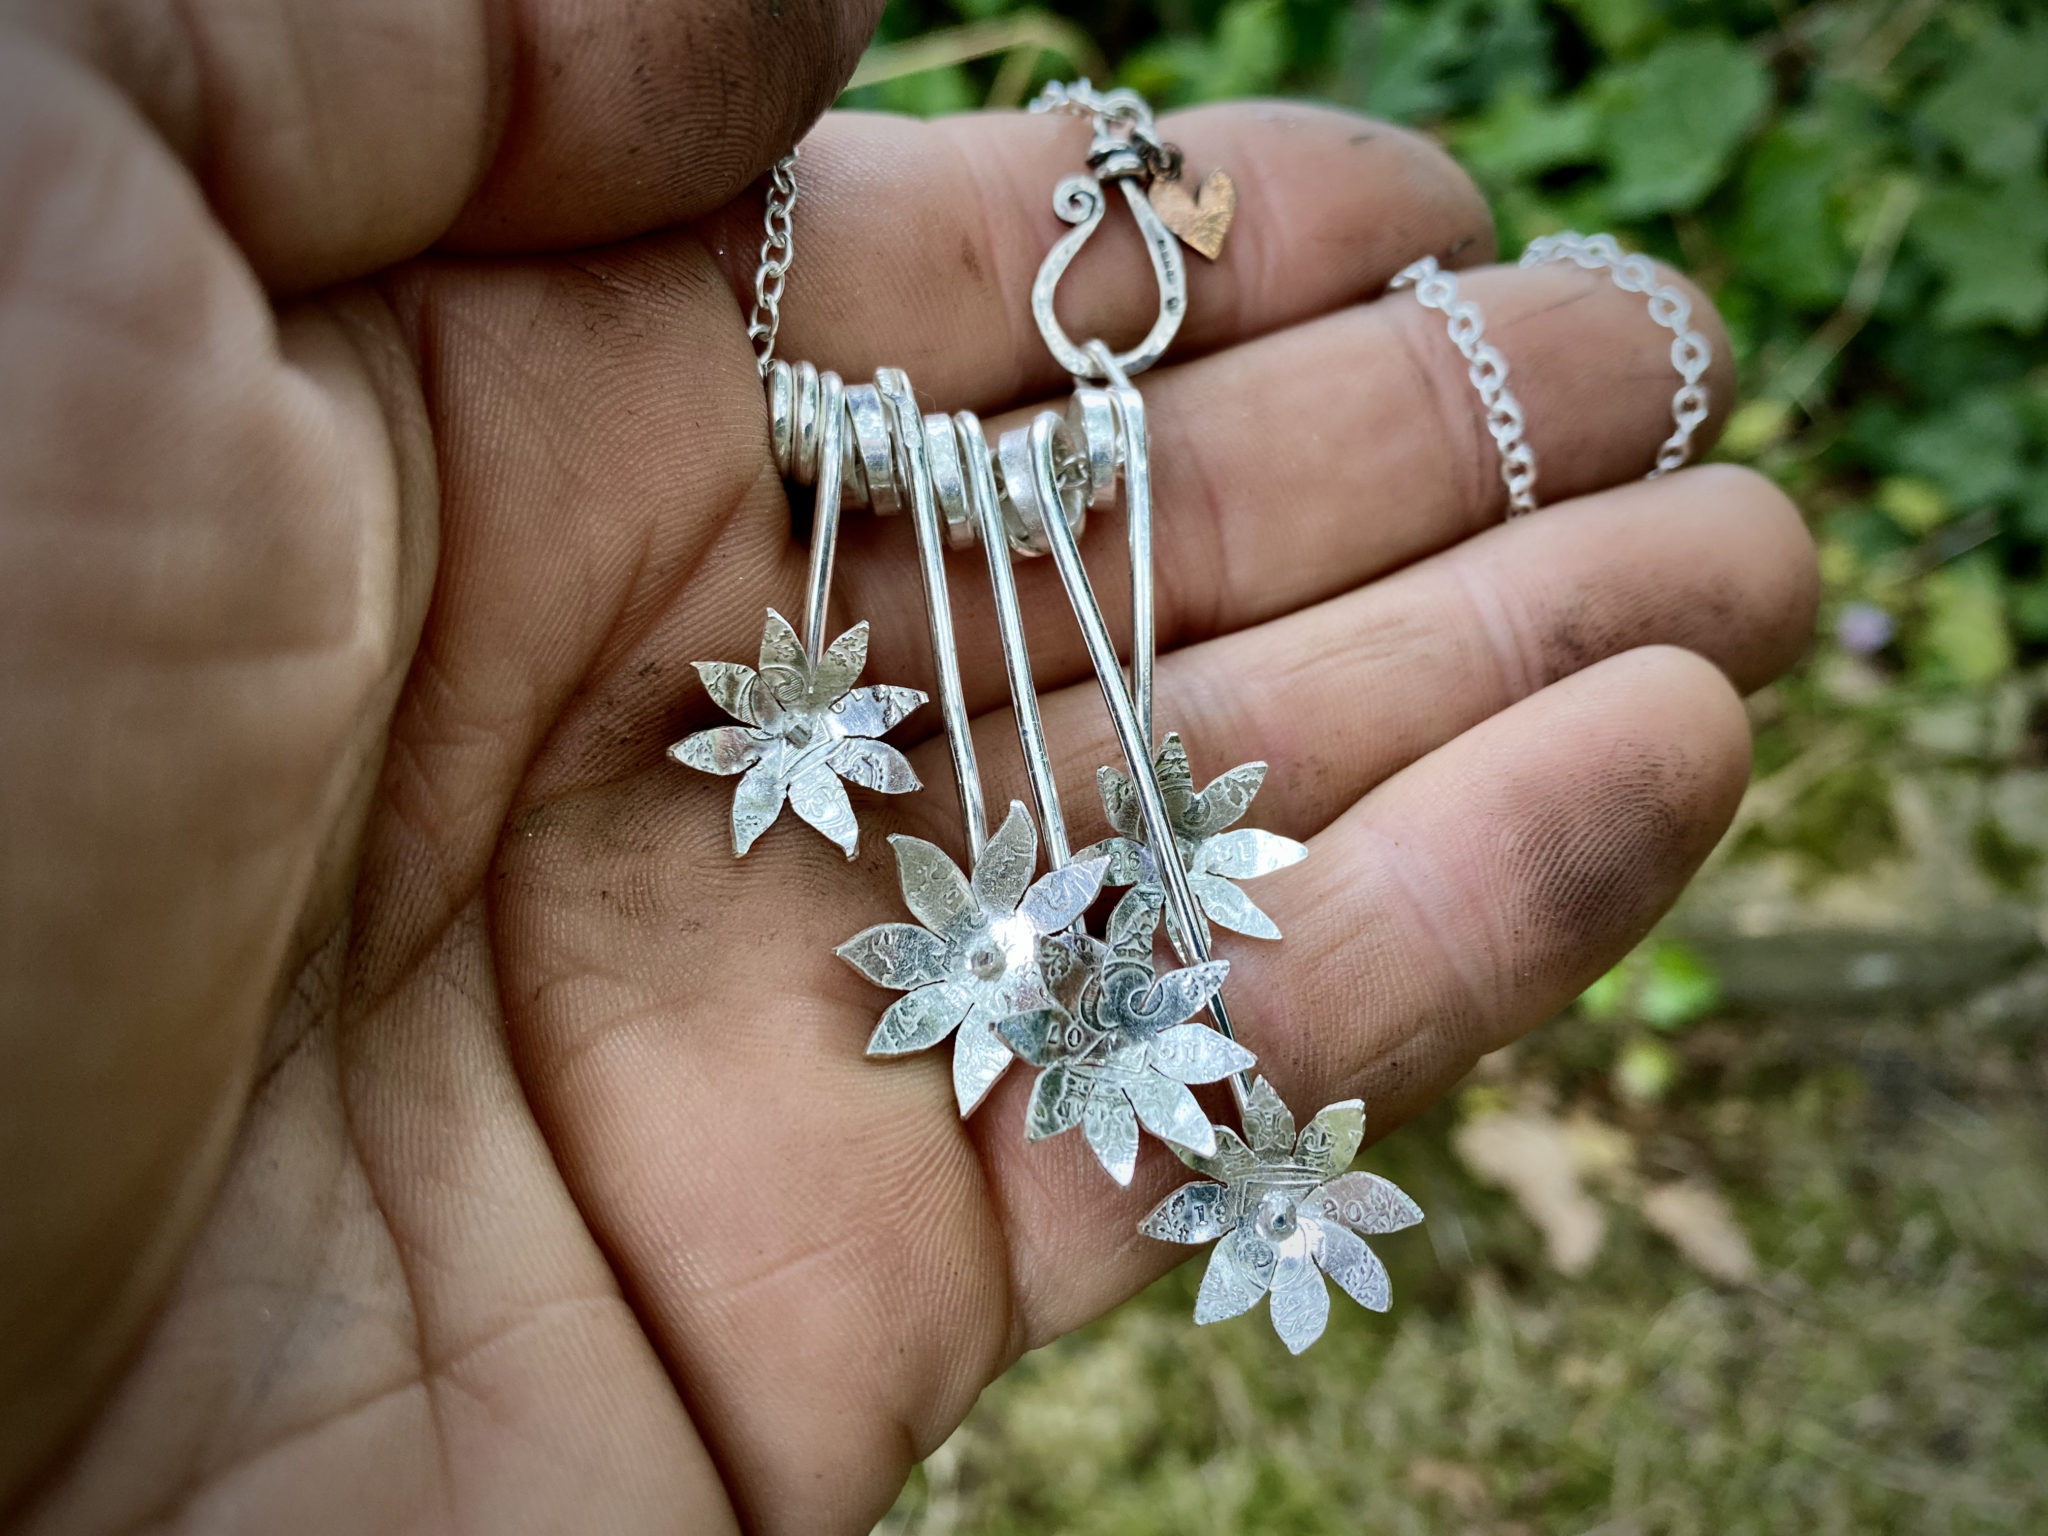 flowers made from silver coins